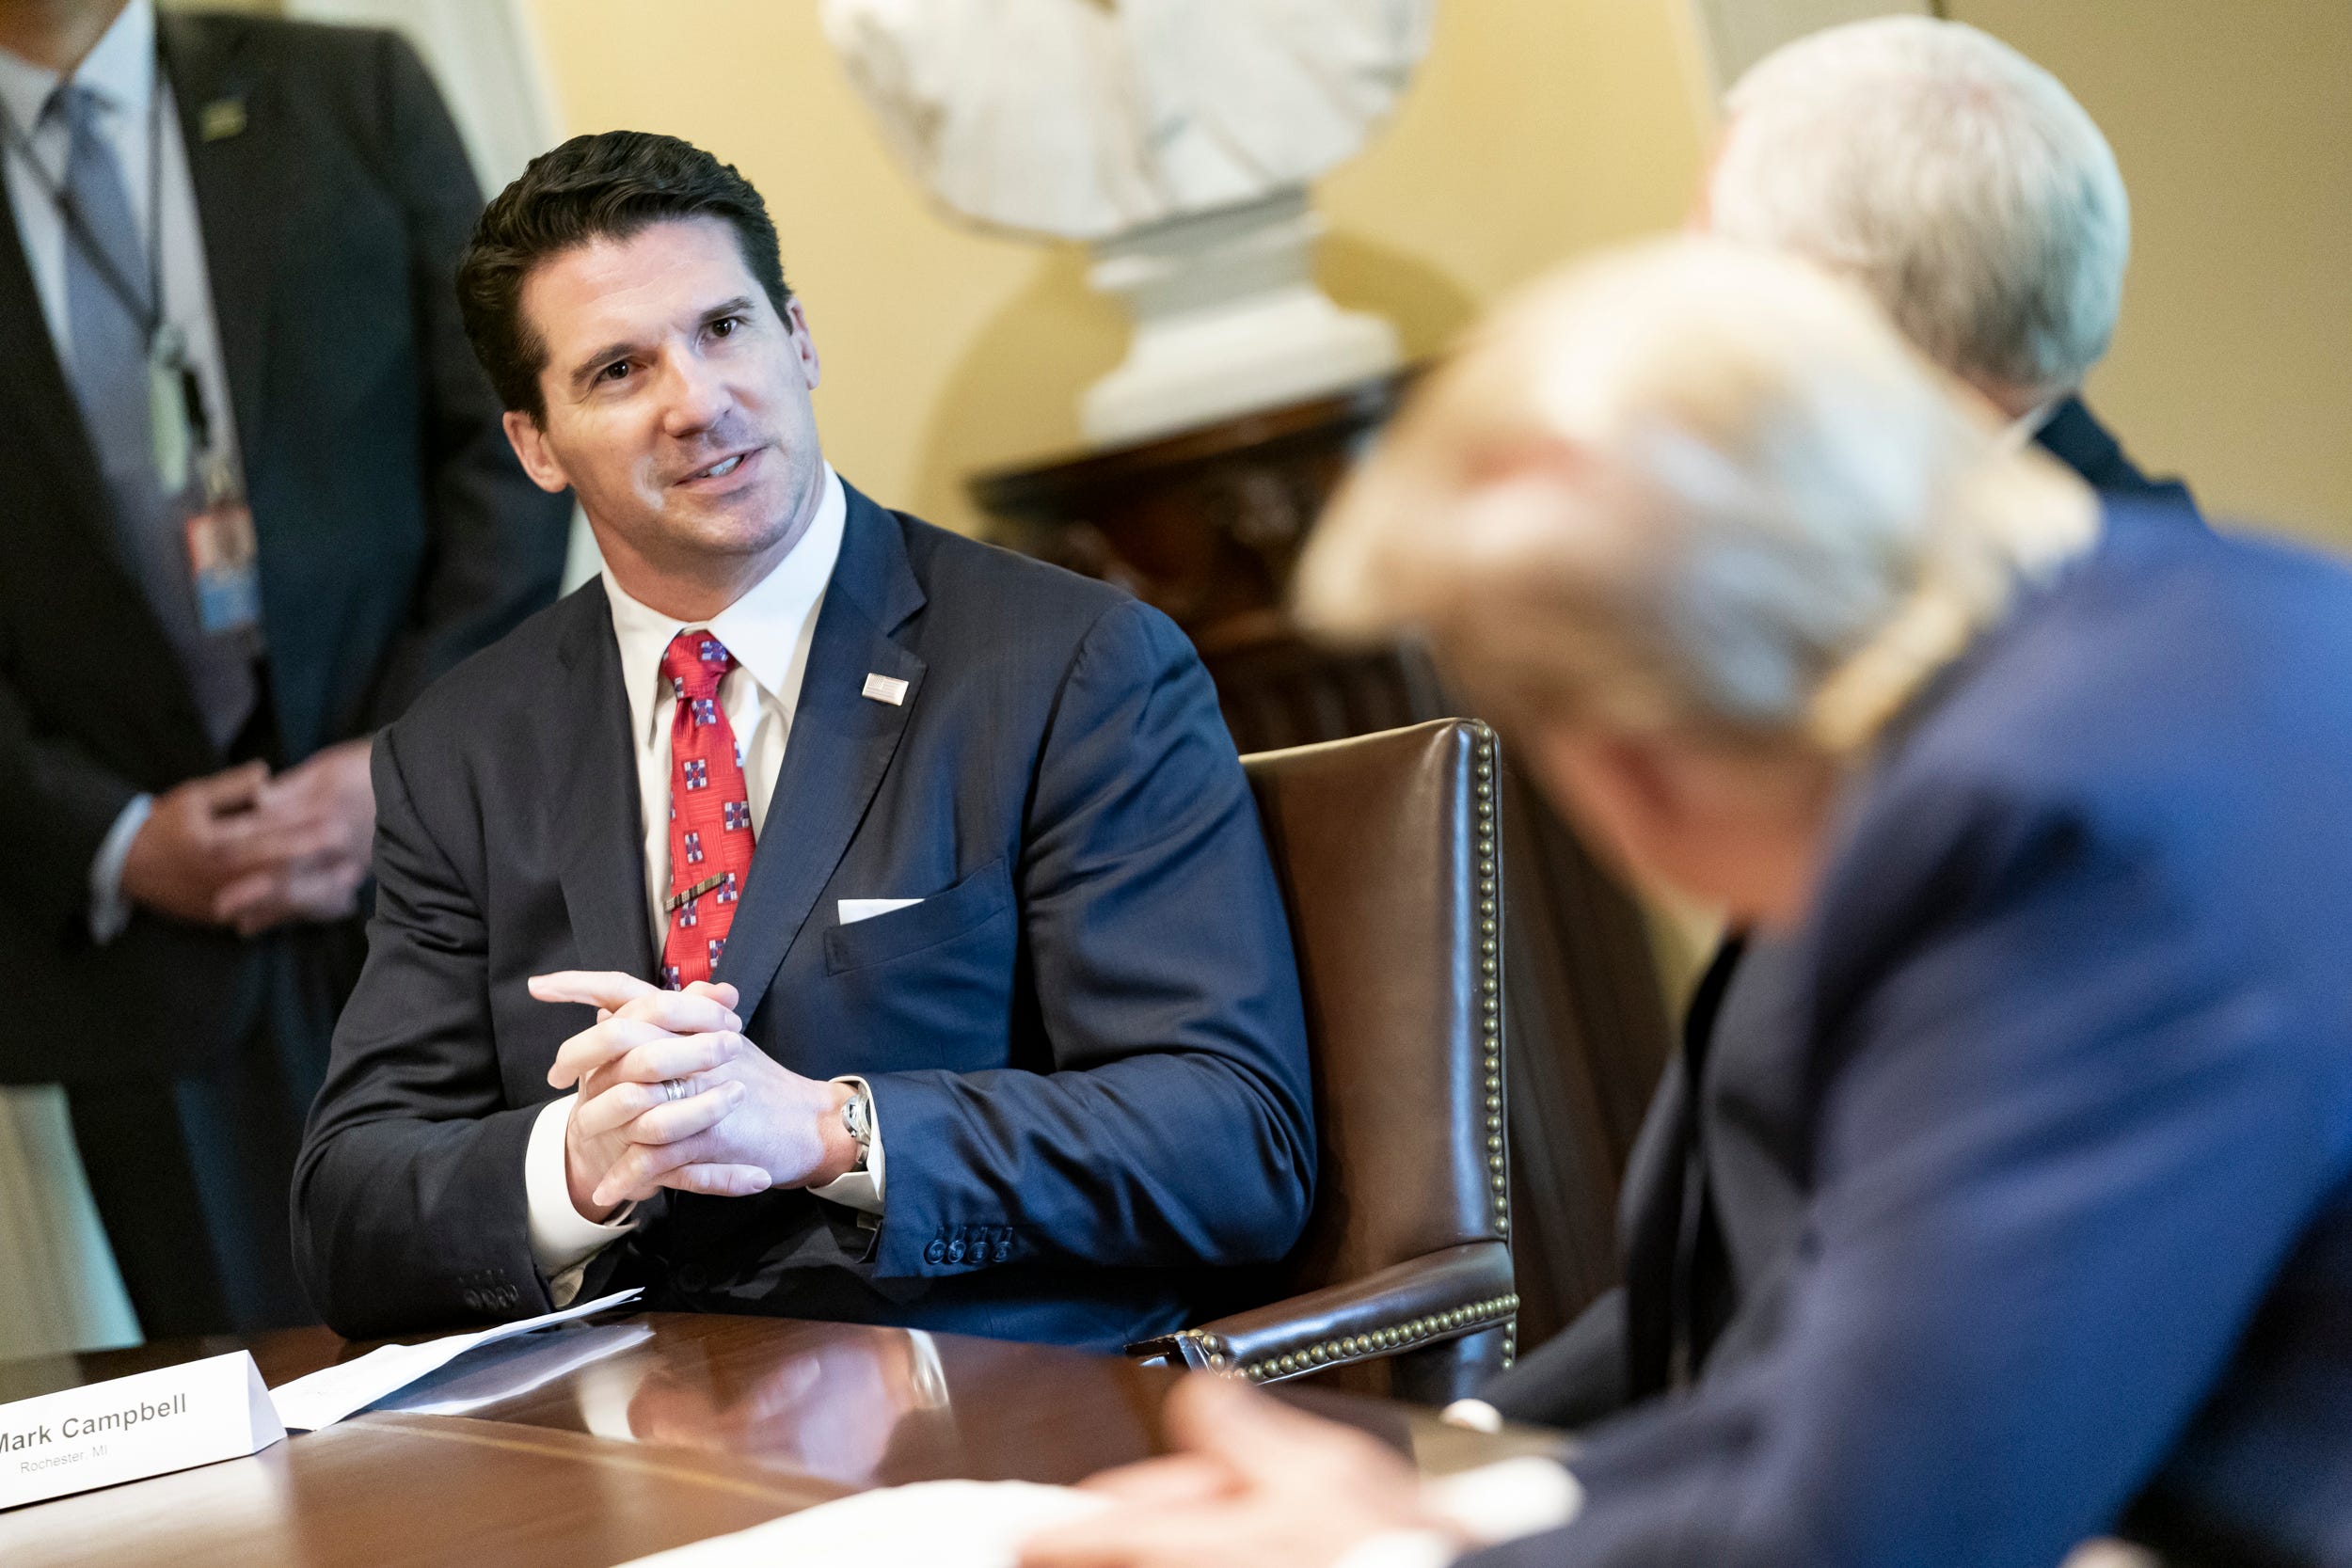 Former University of Michigan football player Mark Campbell, of Rochester, spoke Tuesday with President Donald Trump about his recovery from COIVD-19 in the Cabinet Room of the White House on April 14, 2020.